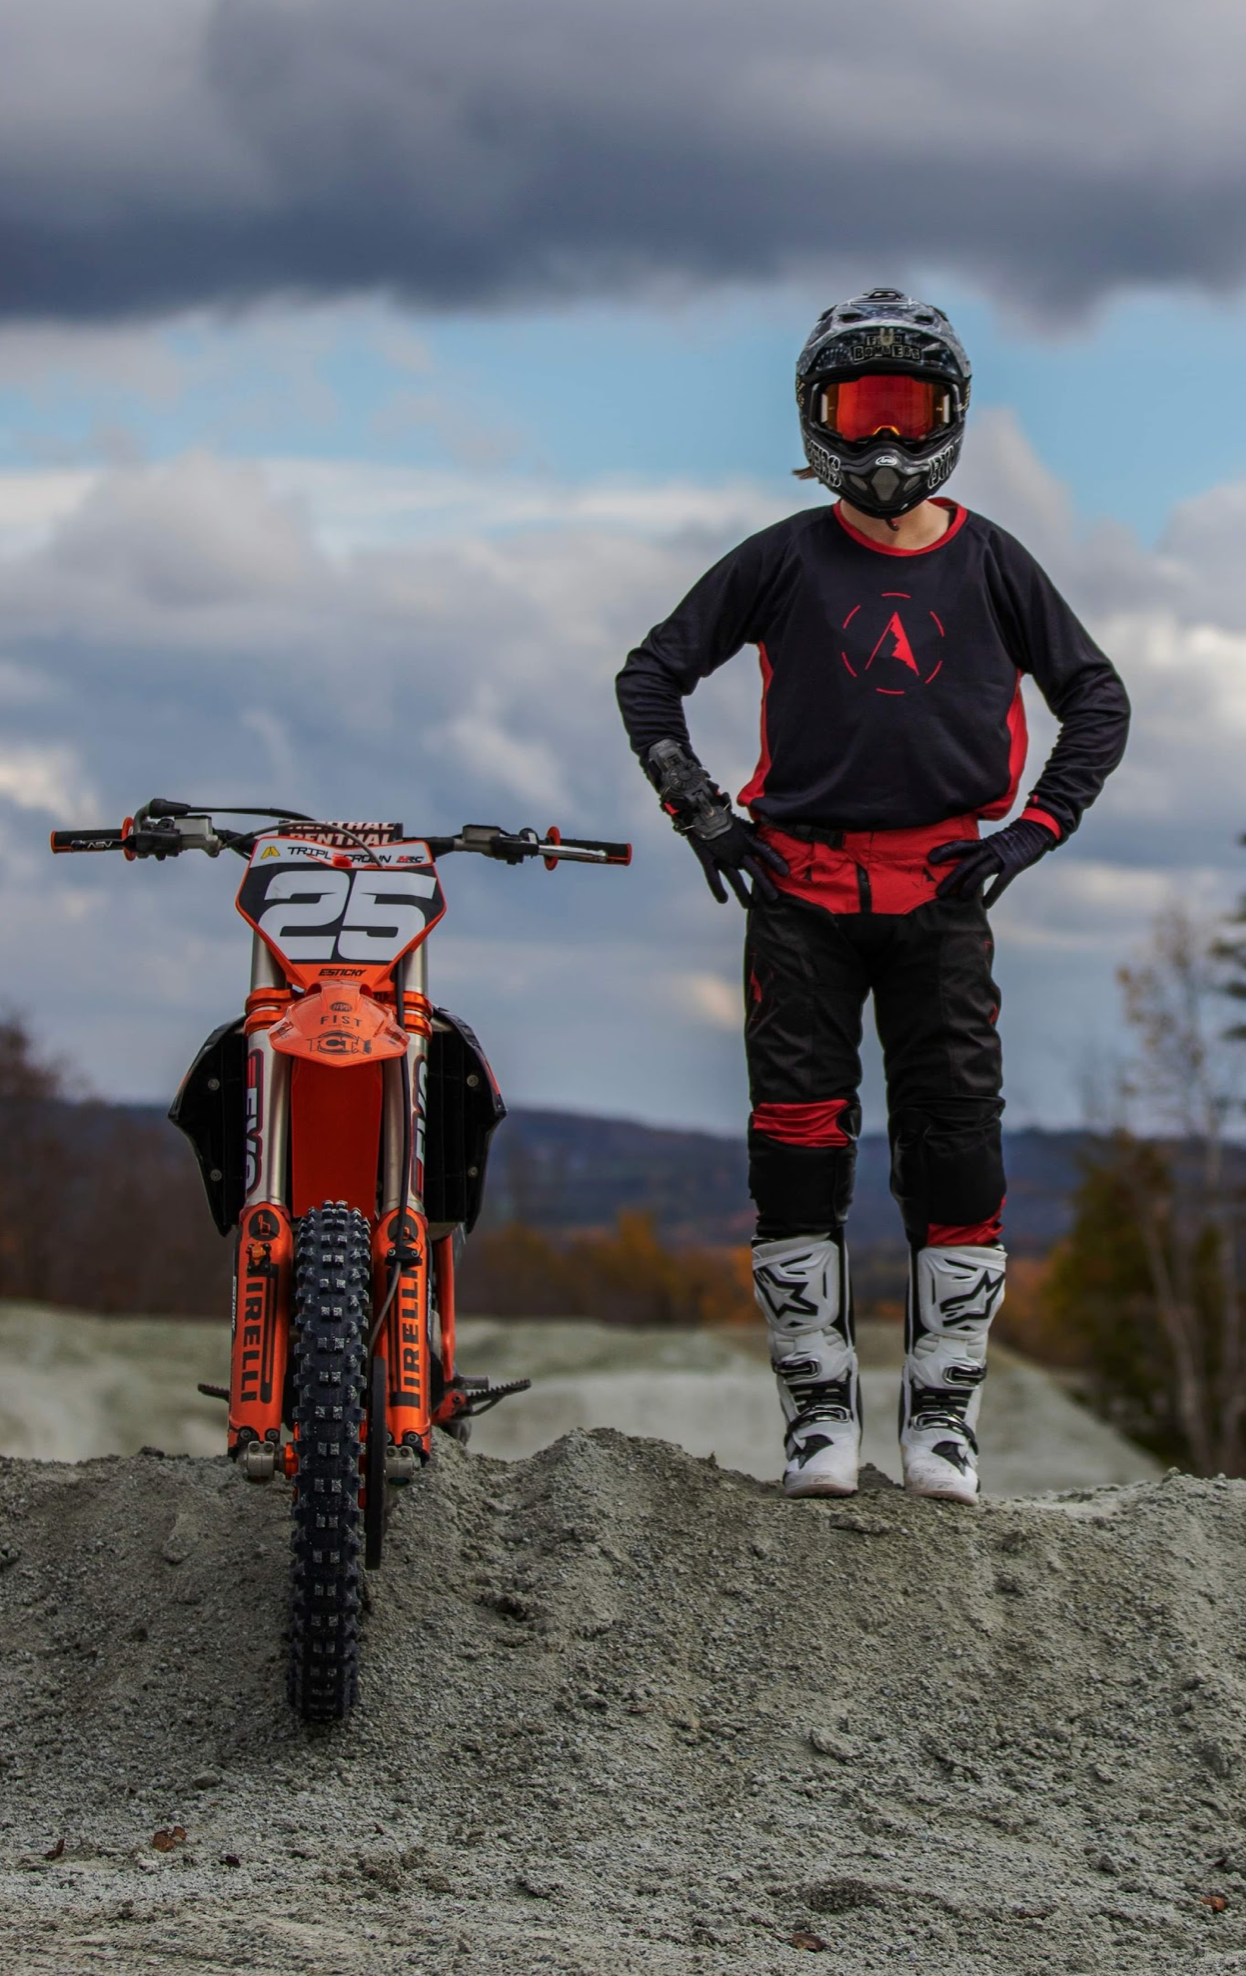 Jersey Mx 22 - Black and Red